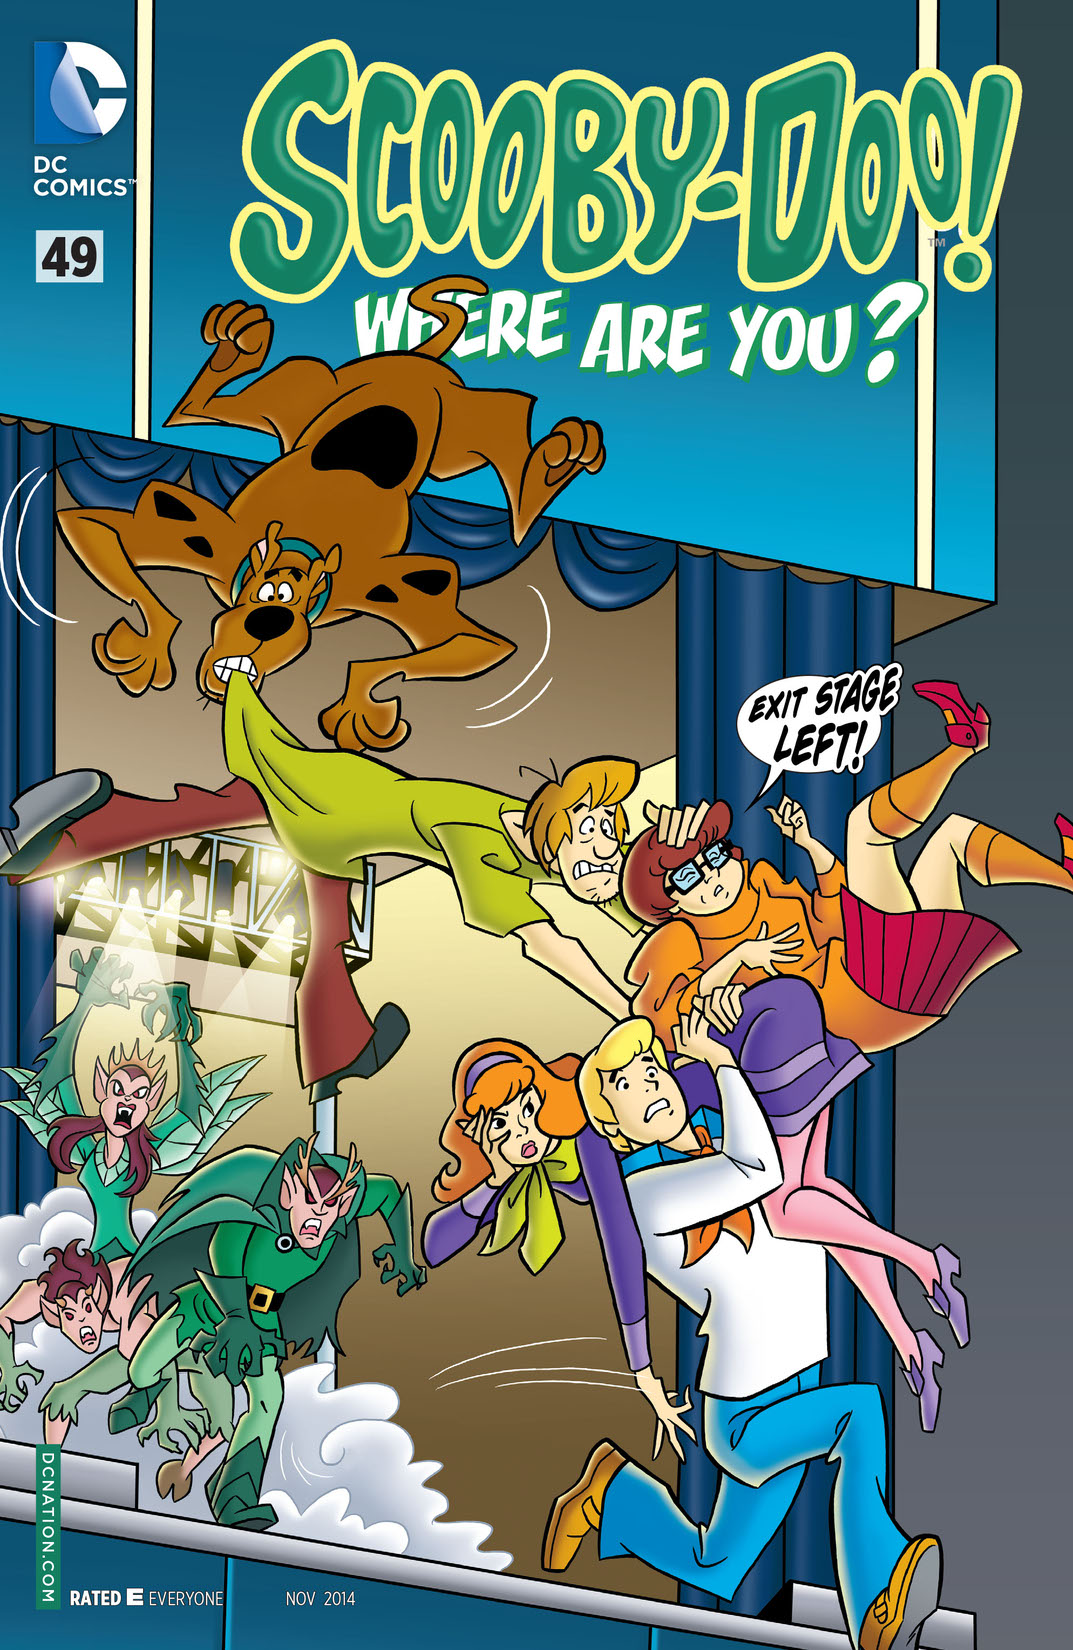 Scooby-Doo, Where Are You? #49 preview images